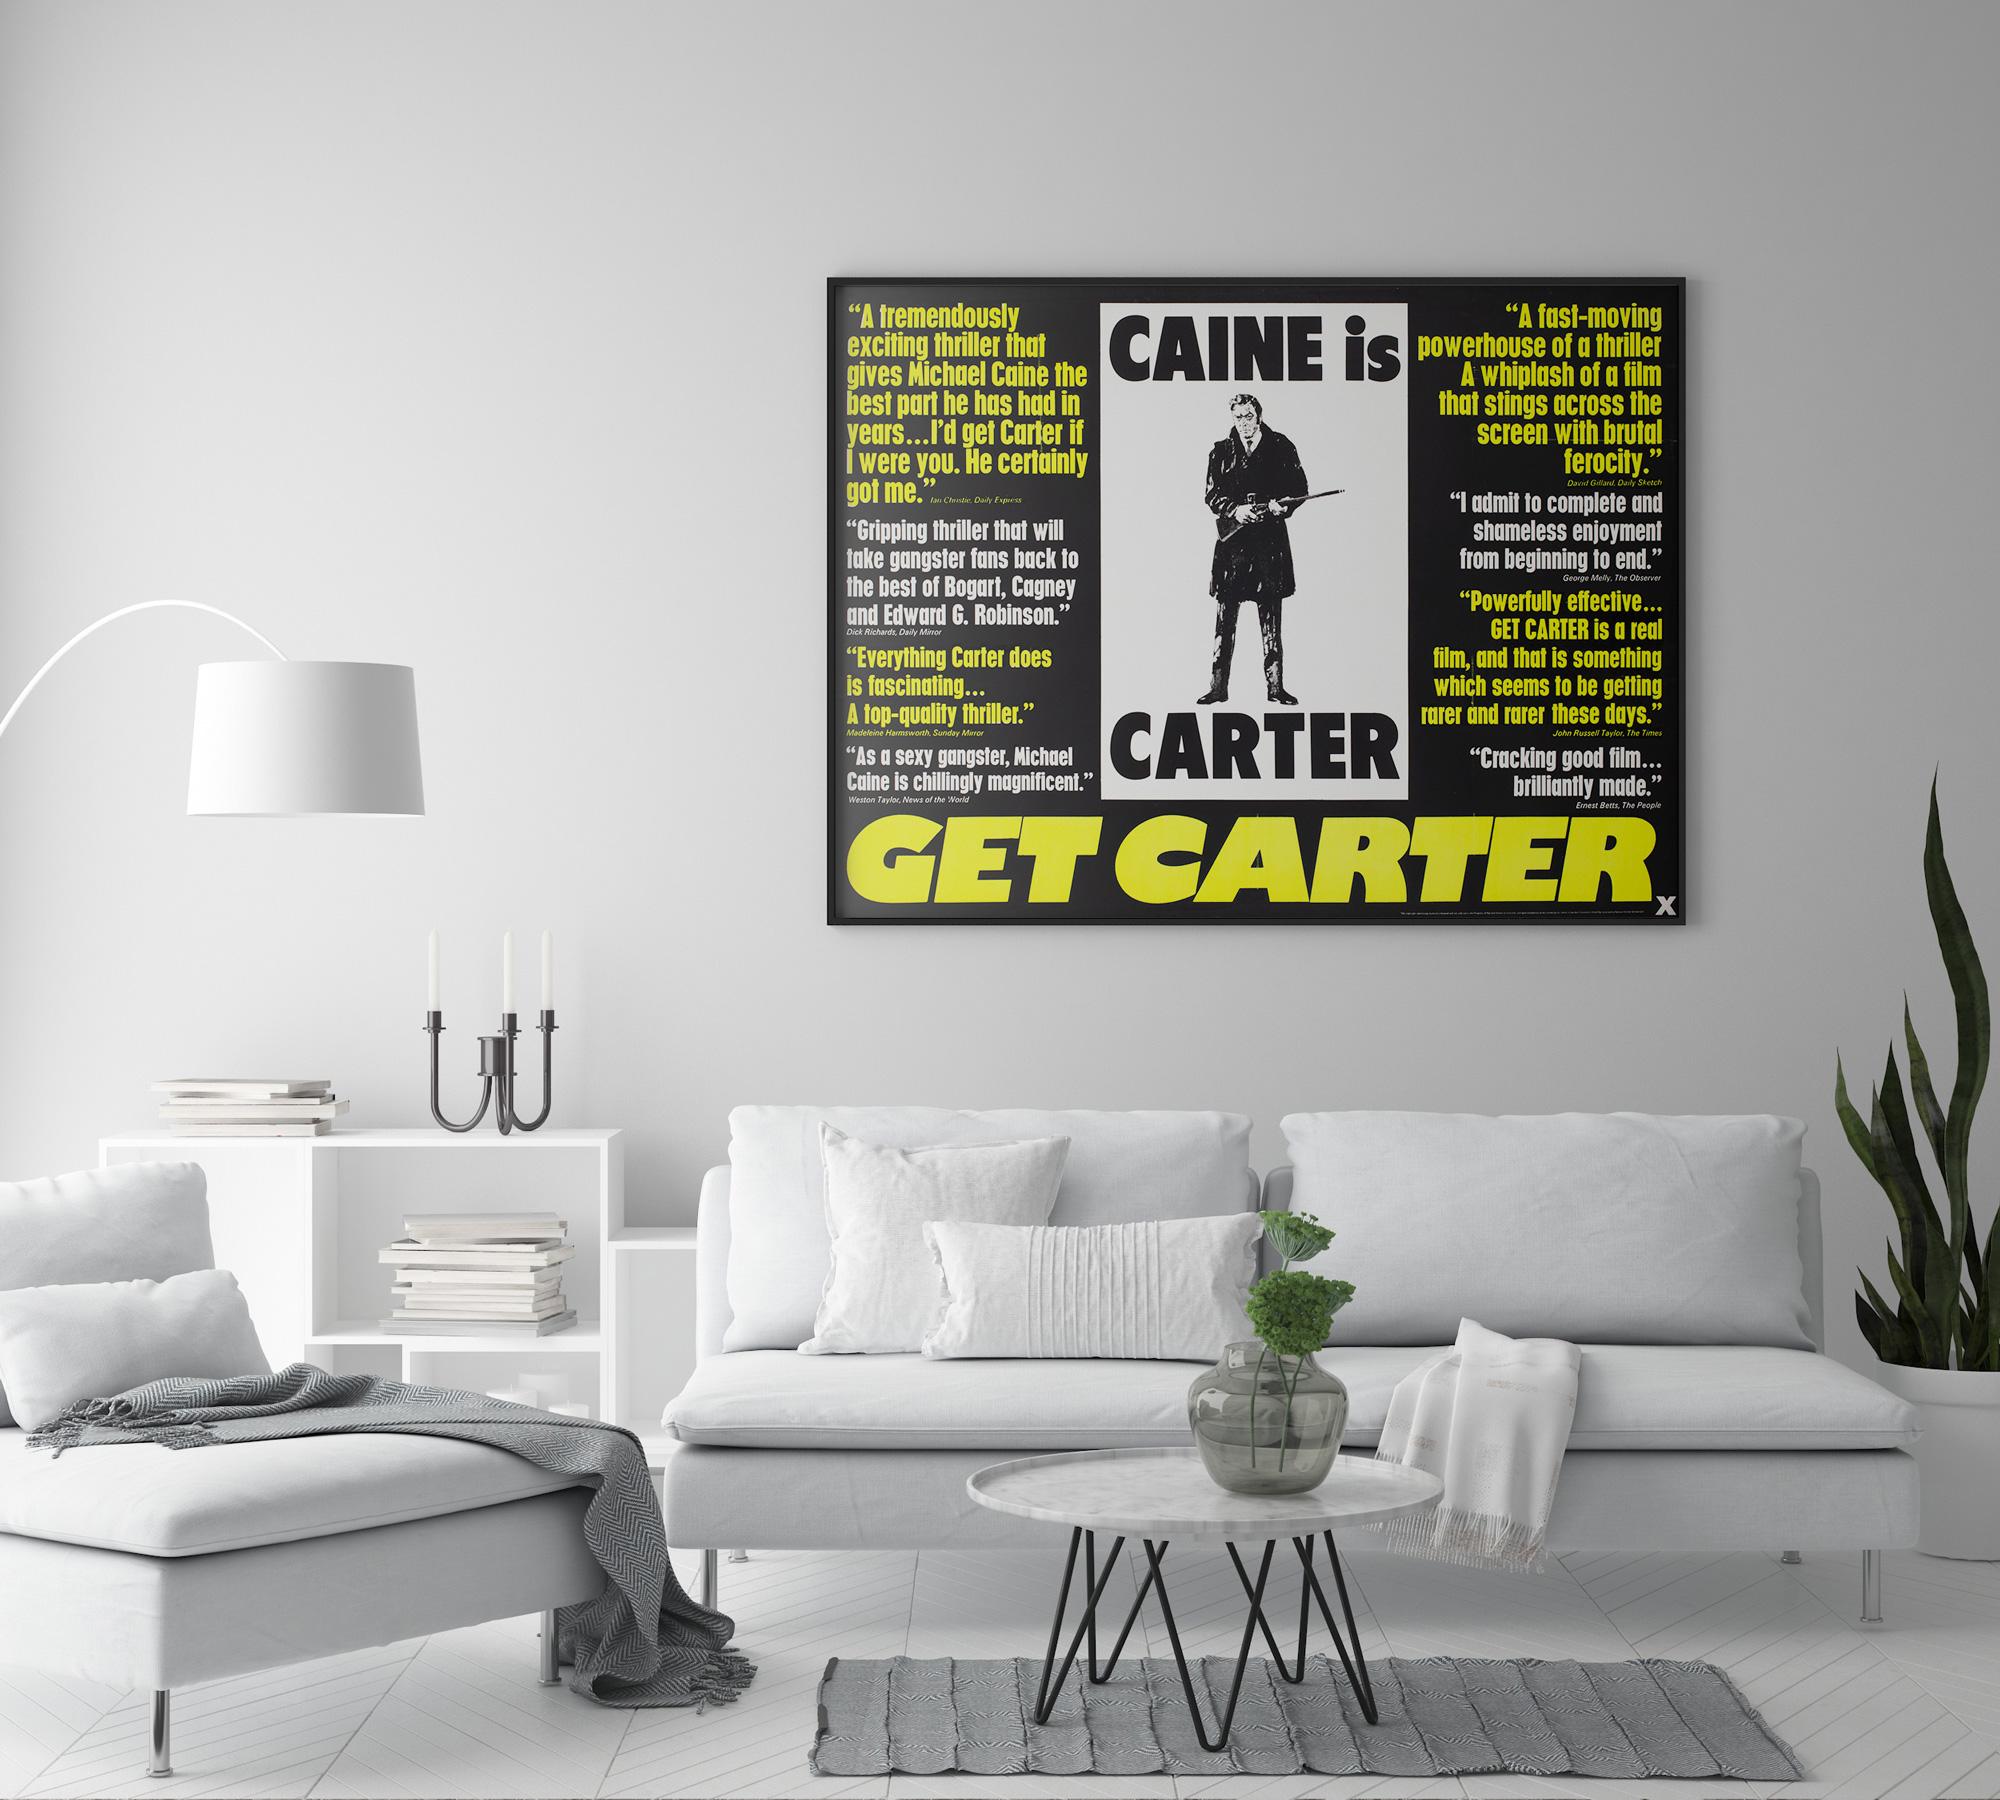 Get Carter 1971 UK Quad Quotes style film movie poster

The very rare UK quotes style quad film poster for 70s gritty Michael Caine thriller Get Carter. Fantastic fluorescent dayglo text (which actually looks better in person than